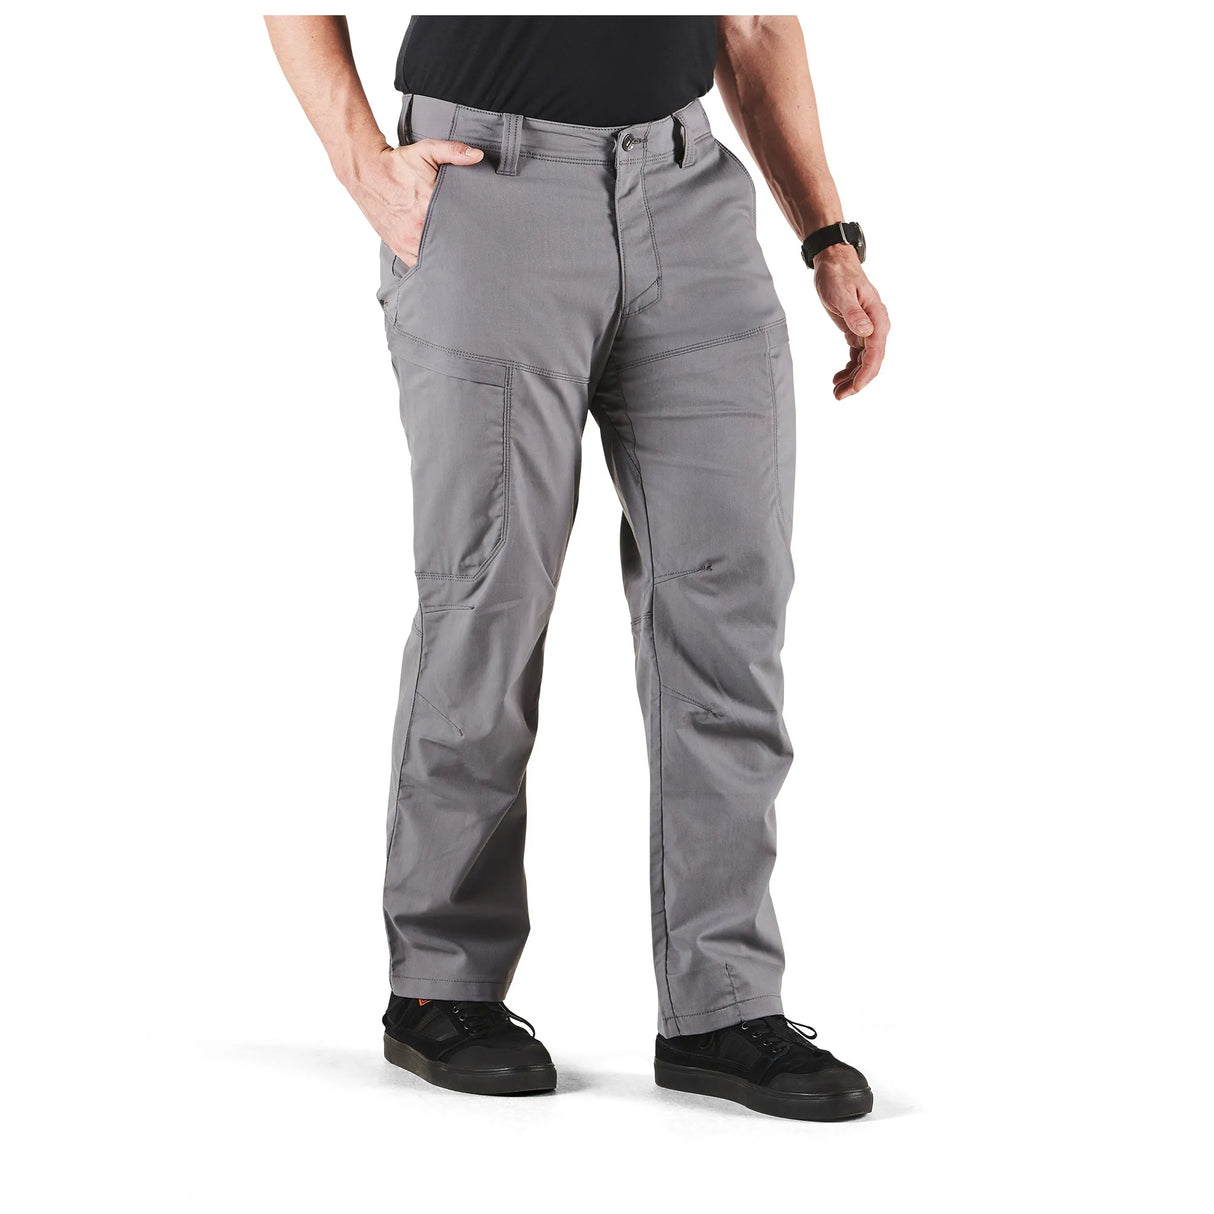 CCW-Ready Comfort Waistband: Ensures a comfortable fit for concealed carry.